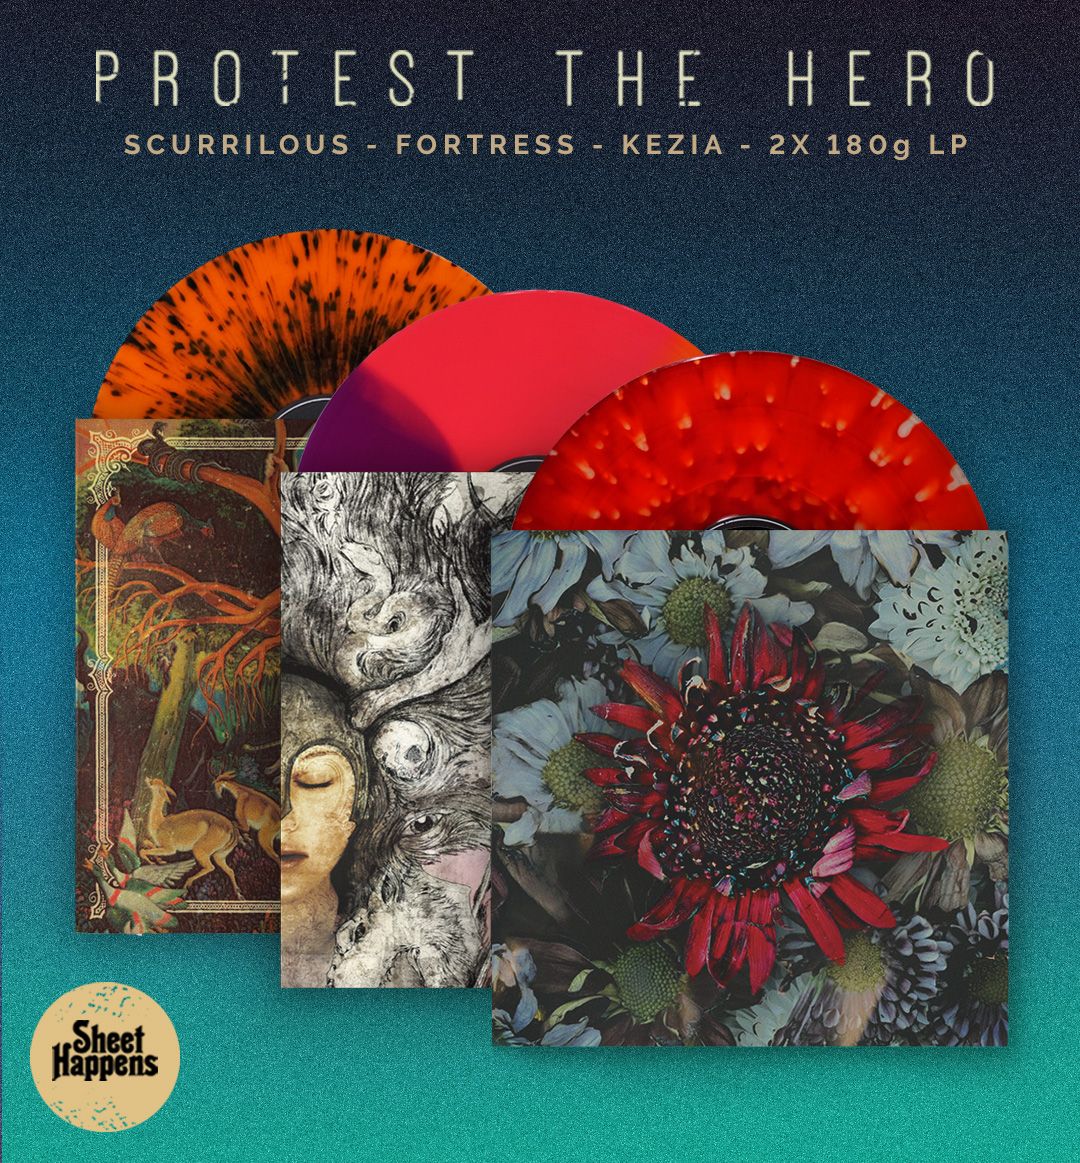 Thanks to everyone who’s picked up the new Protest The Hero vinyl! These are moving fast and won’t be around for long, so be sure to grab yours while you can! Check them out at shthppns.com @ProtestTheHero